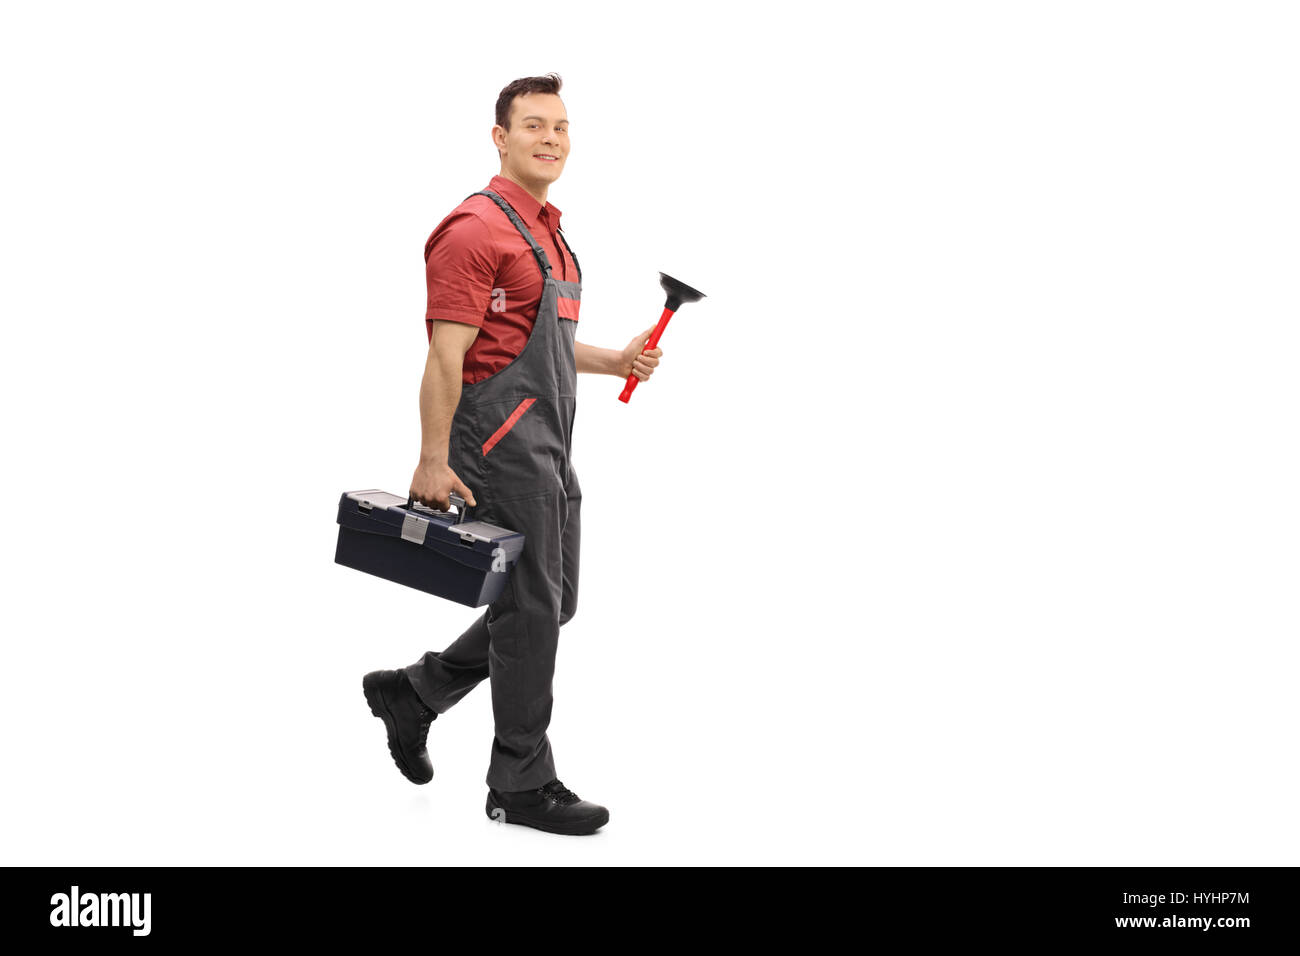 Full length portrait of a plumber with a toolbox and a plunger walking and looking at the camera isolated on white background Stock Photo